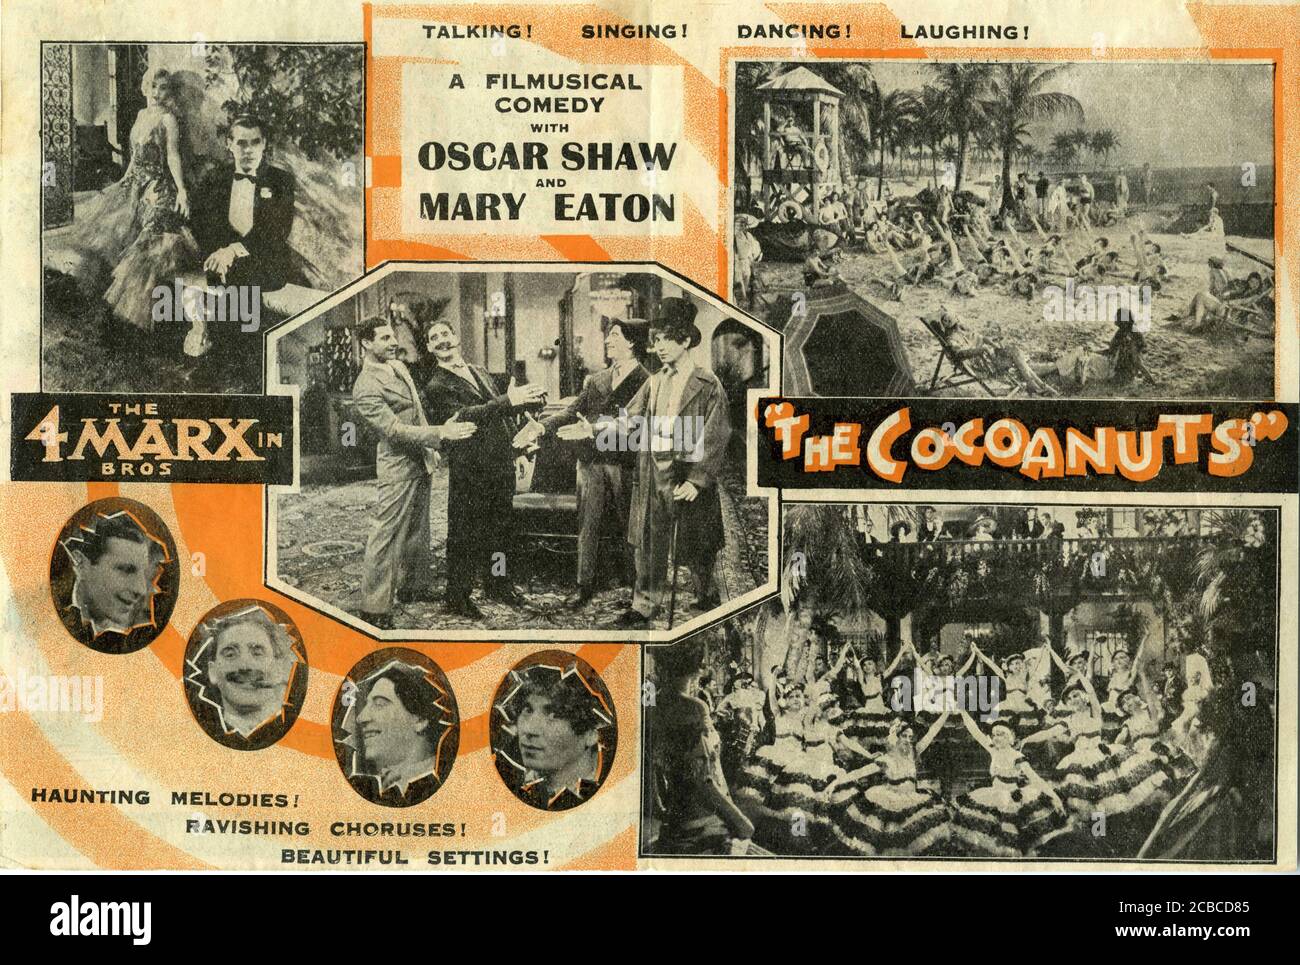 THE FOUR MARX BROTHERS GROUCHO CHICO HARPO and ZEPPO and OSCAR SHAW and MARY EATON in THE COCOANUTS  1929 directors ROBERT FLOREY  and JOSEPH SANTLEY writers George S. Kaufman and Morrie Ryskind music and lyrics Irving Berlin Paramount Pictures Stock Photo